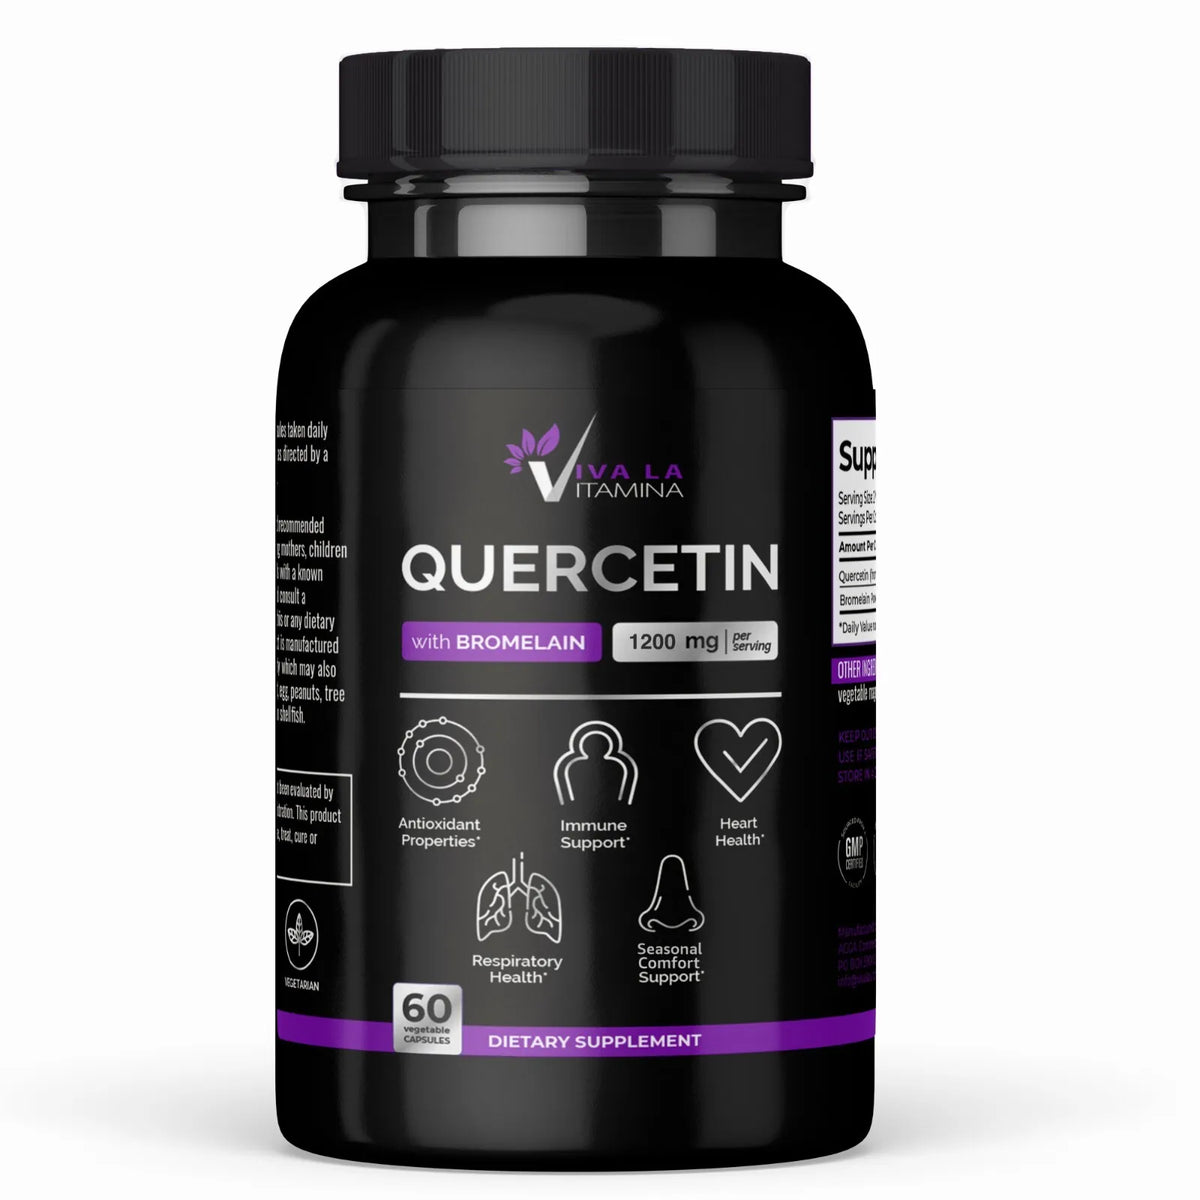 Quercetin with Bromelain Supplement 1200mg, 60 Capsules